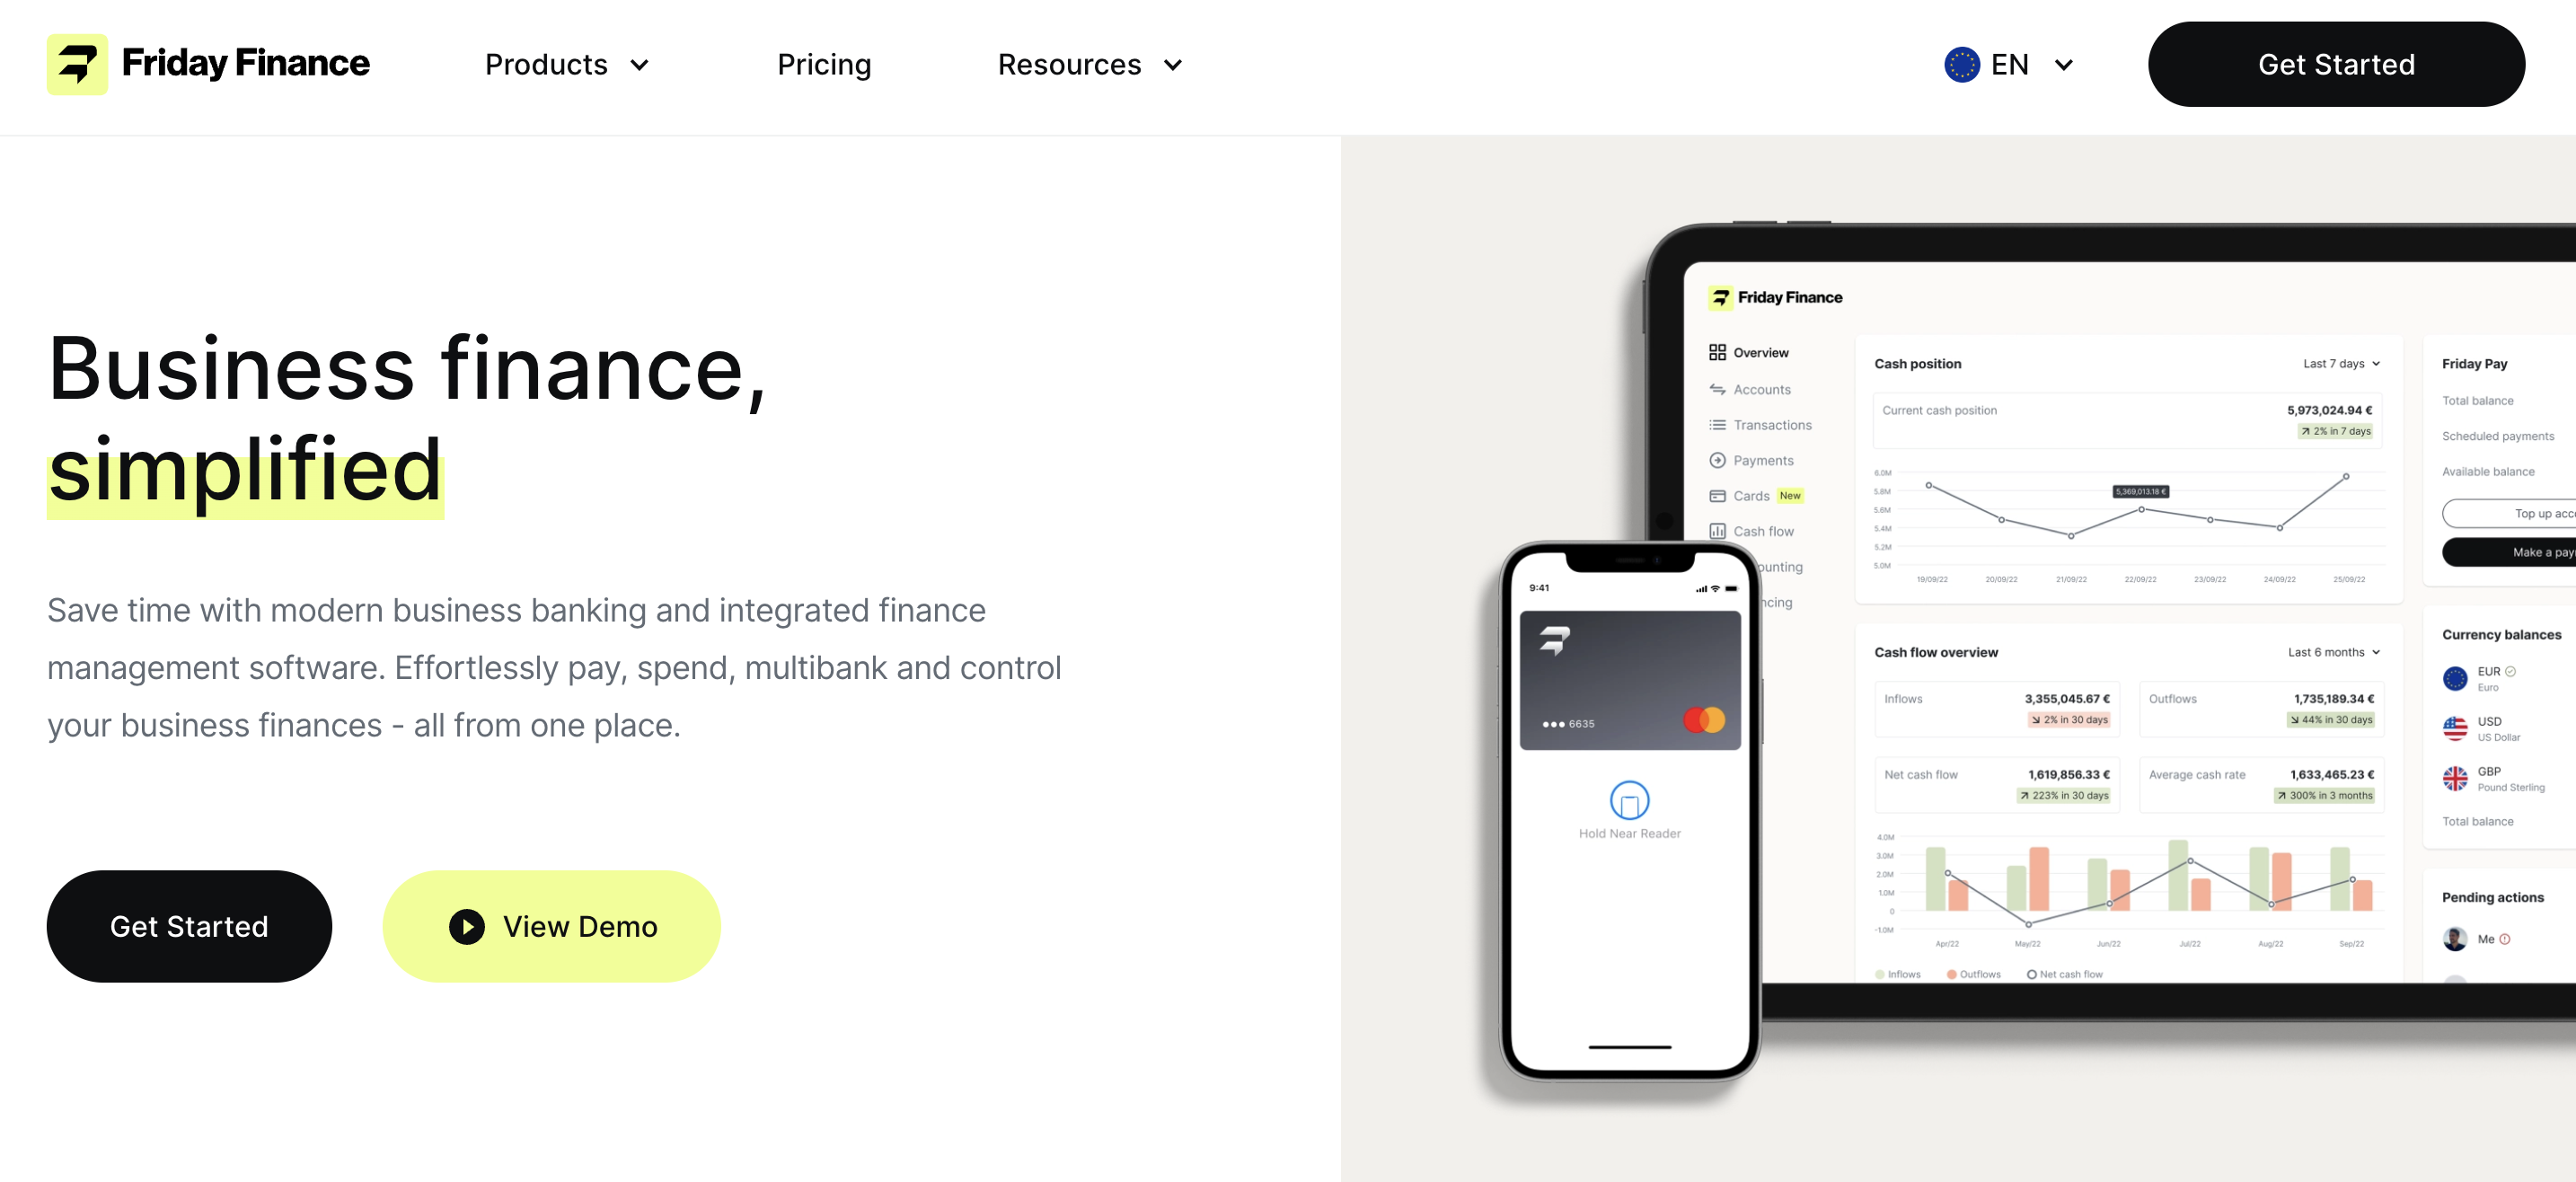 Friday Finance Landing page